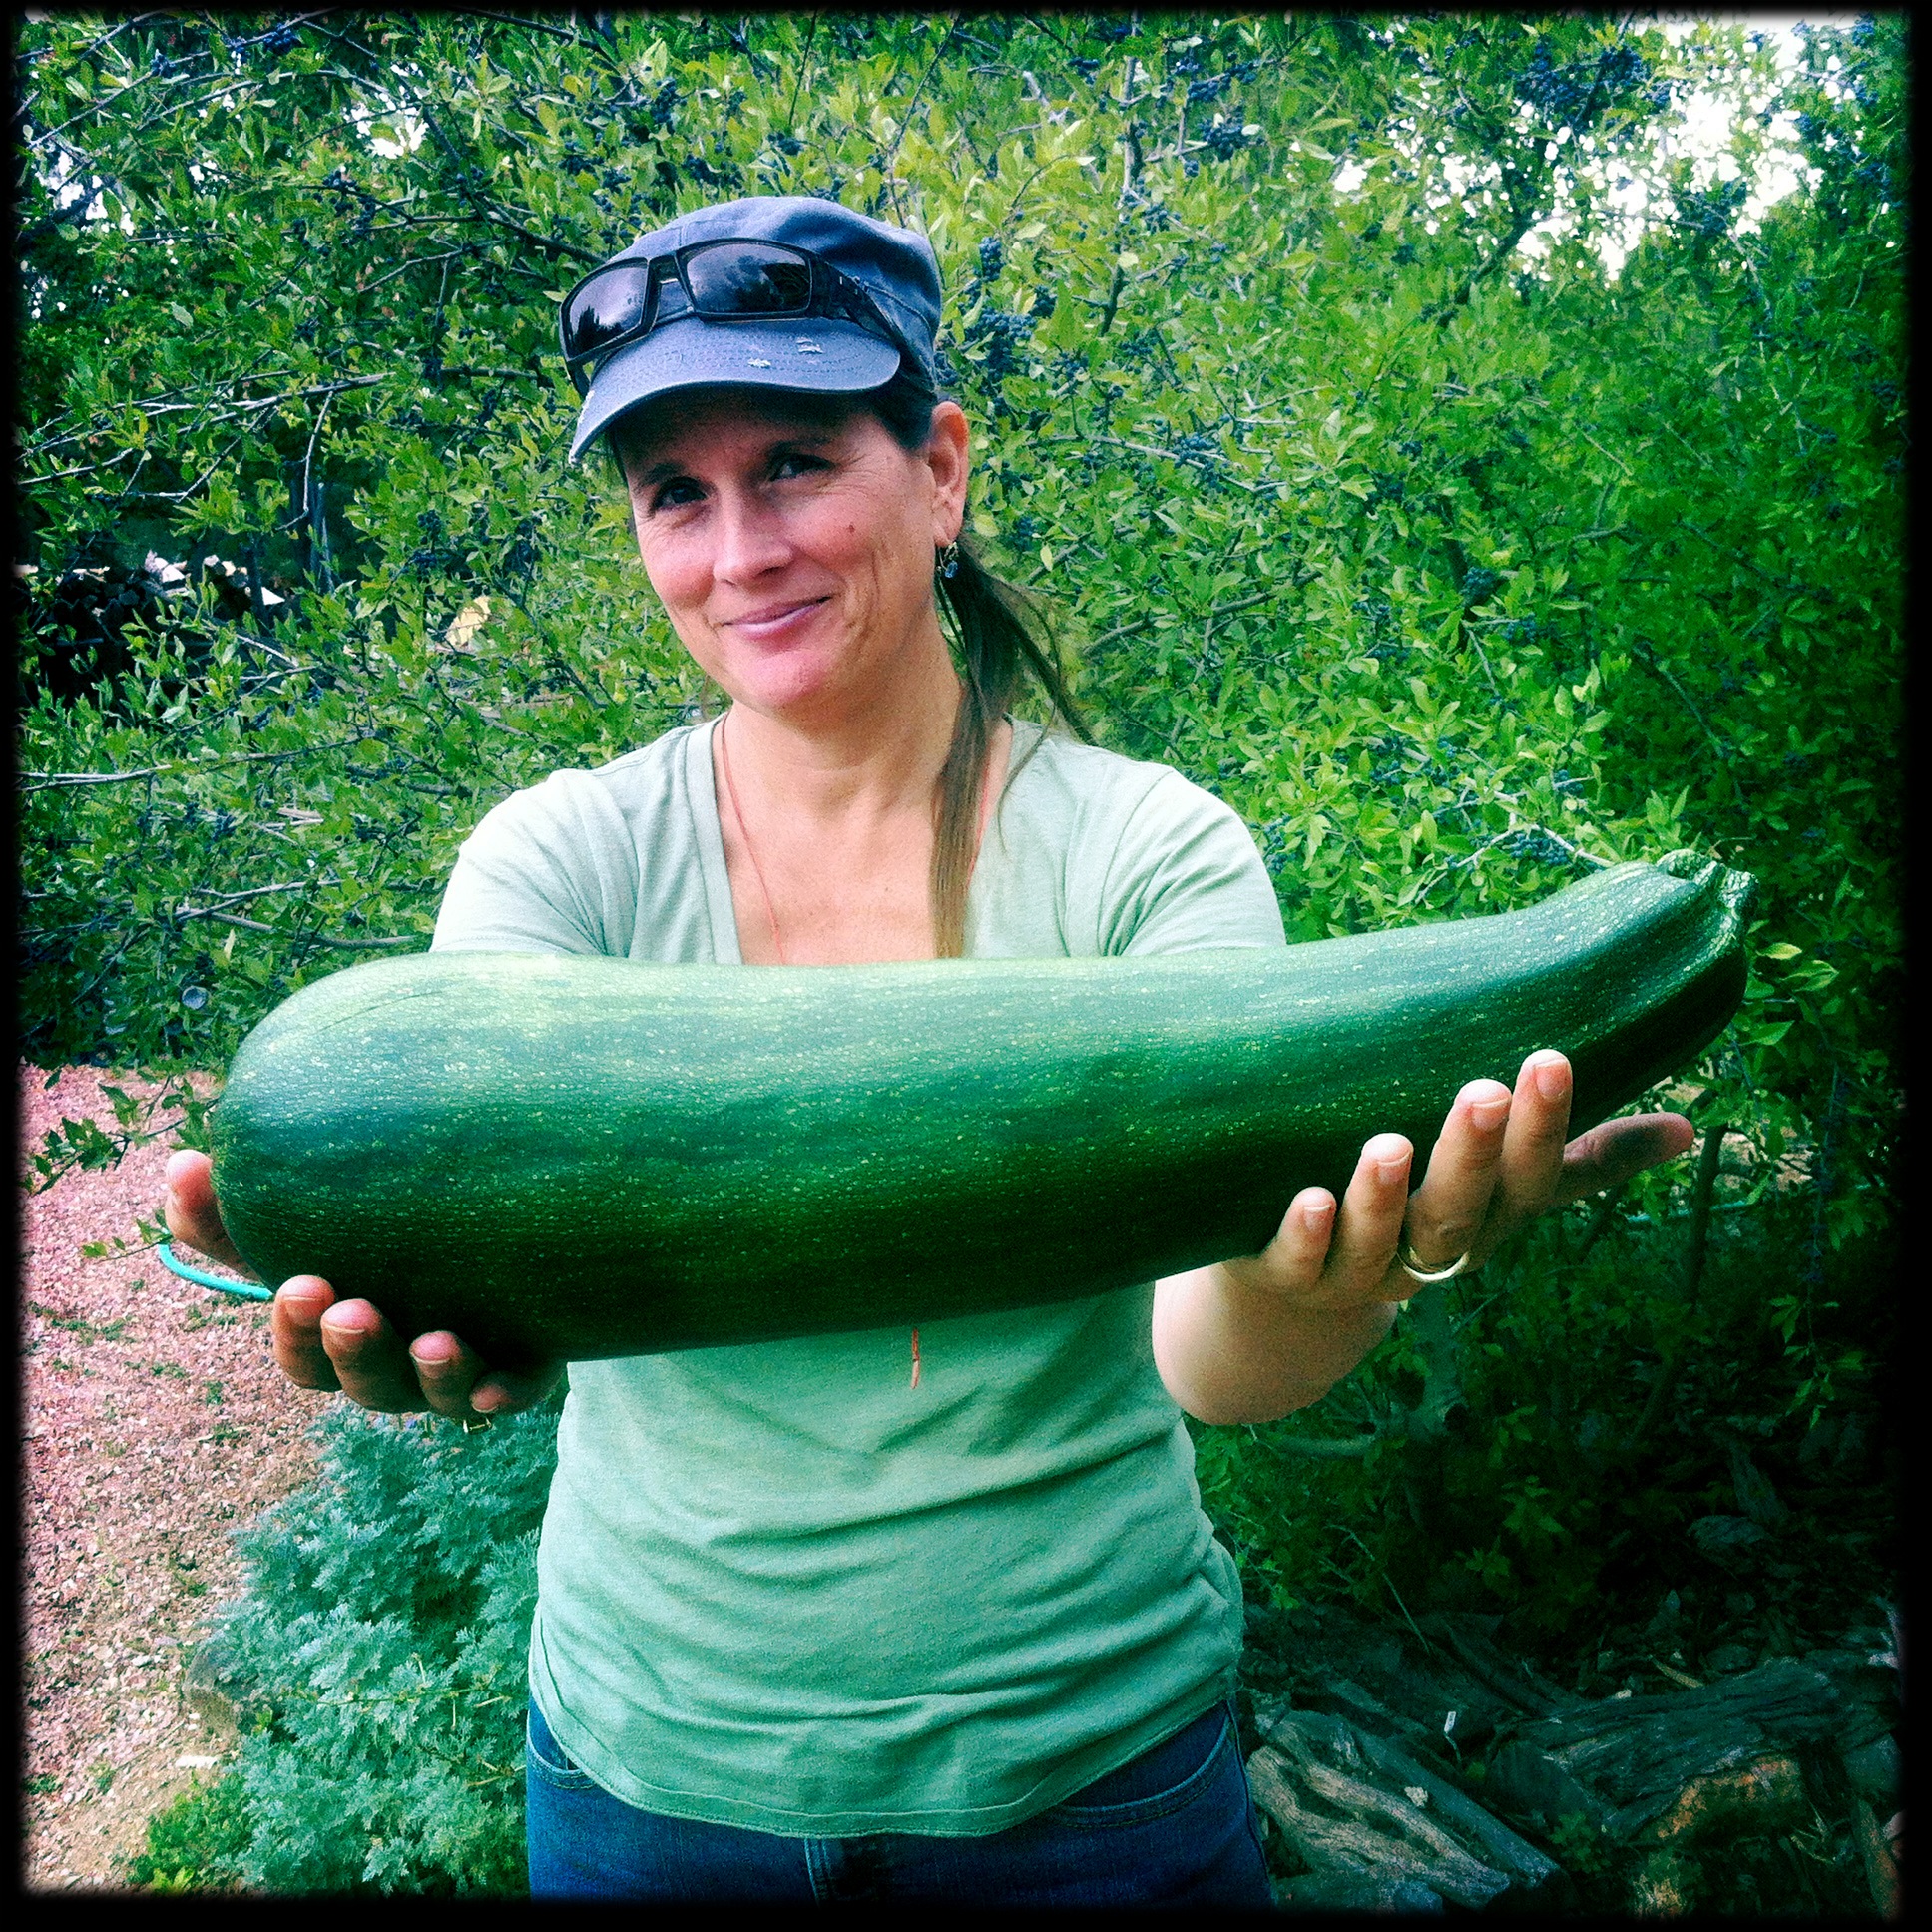 Dawn dropped by with a giant zucchini. Time to get out the grater!